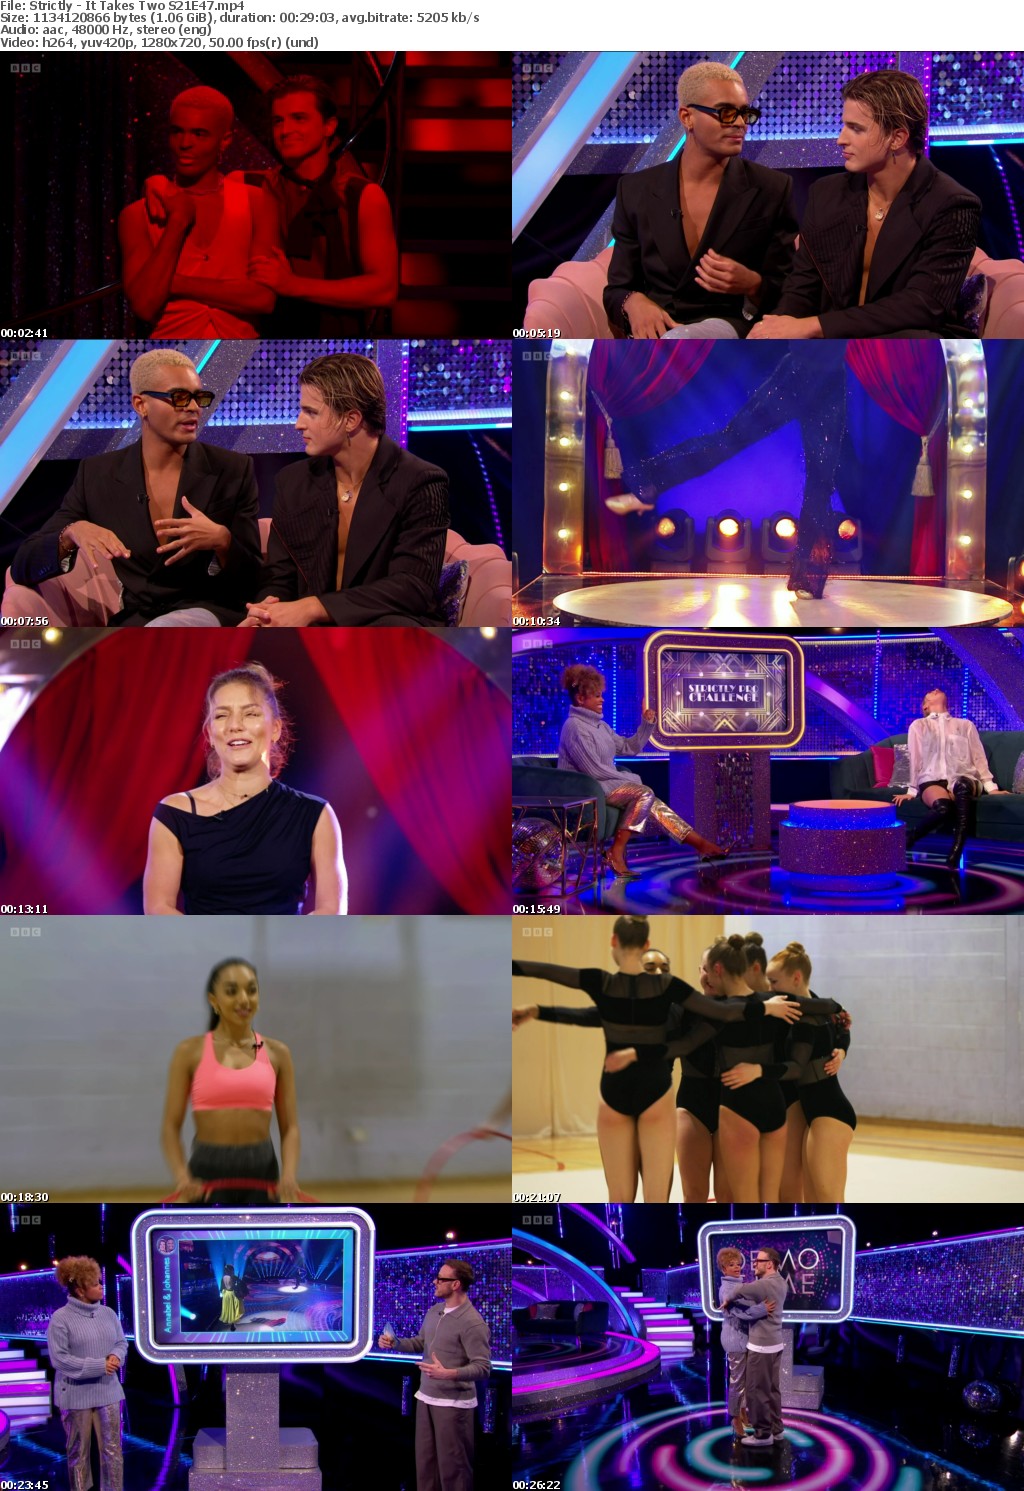 Strictly - It Takes Two S21E47 (1280x720p HD, 50fps, soft Eng subs)